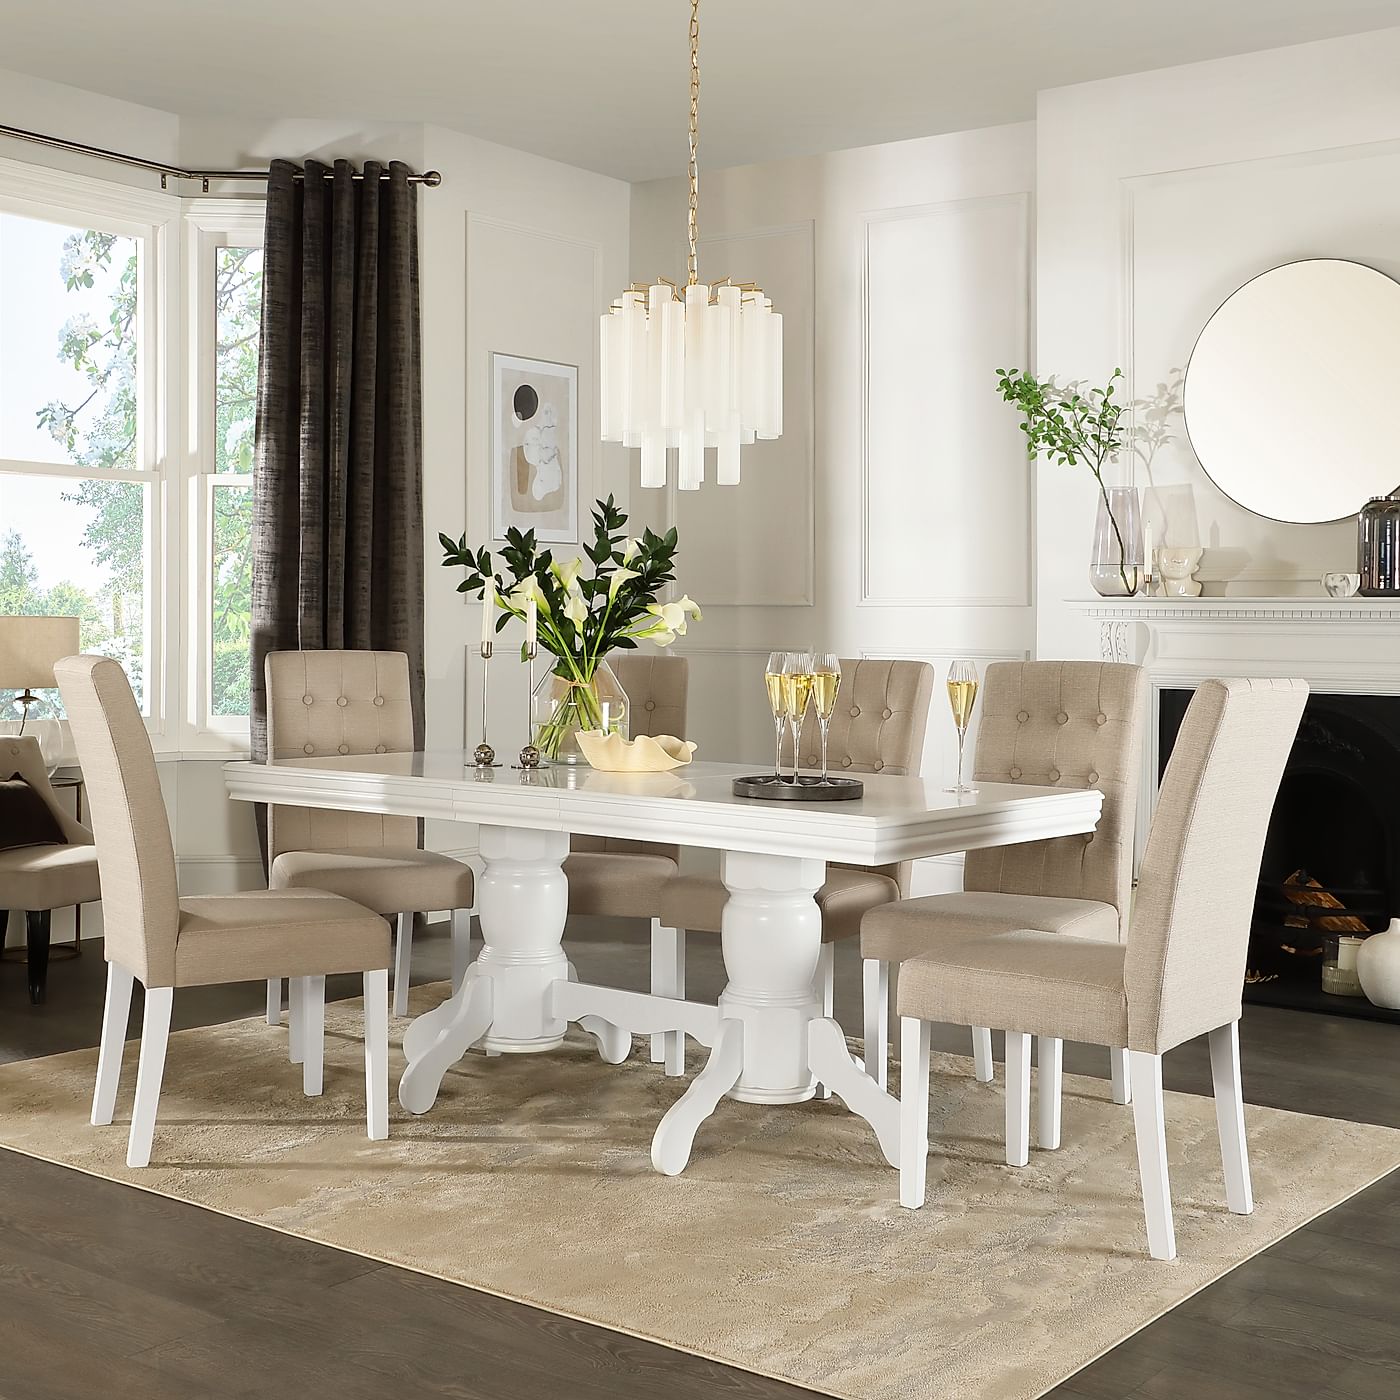 Chatsworth White Extending Dining Table with 6 Regent Oatmeal Chairs